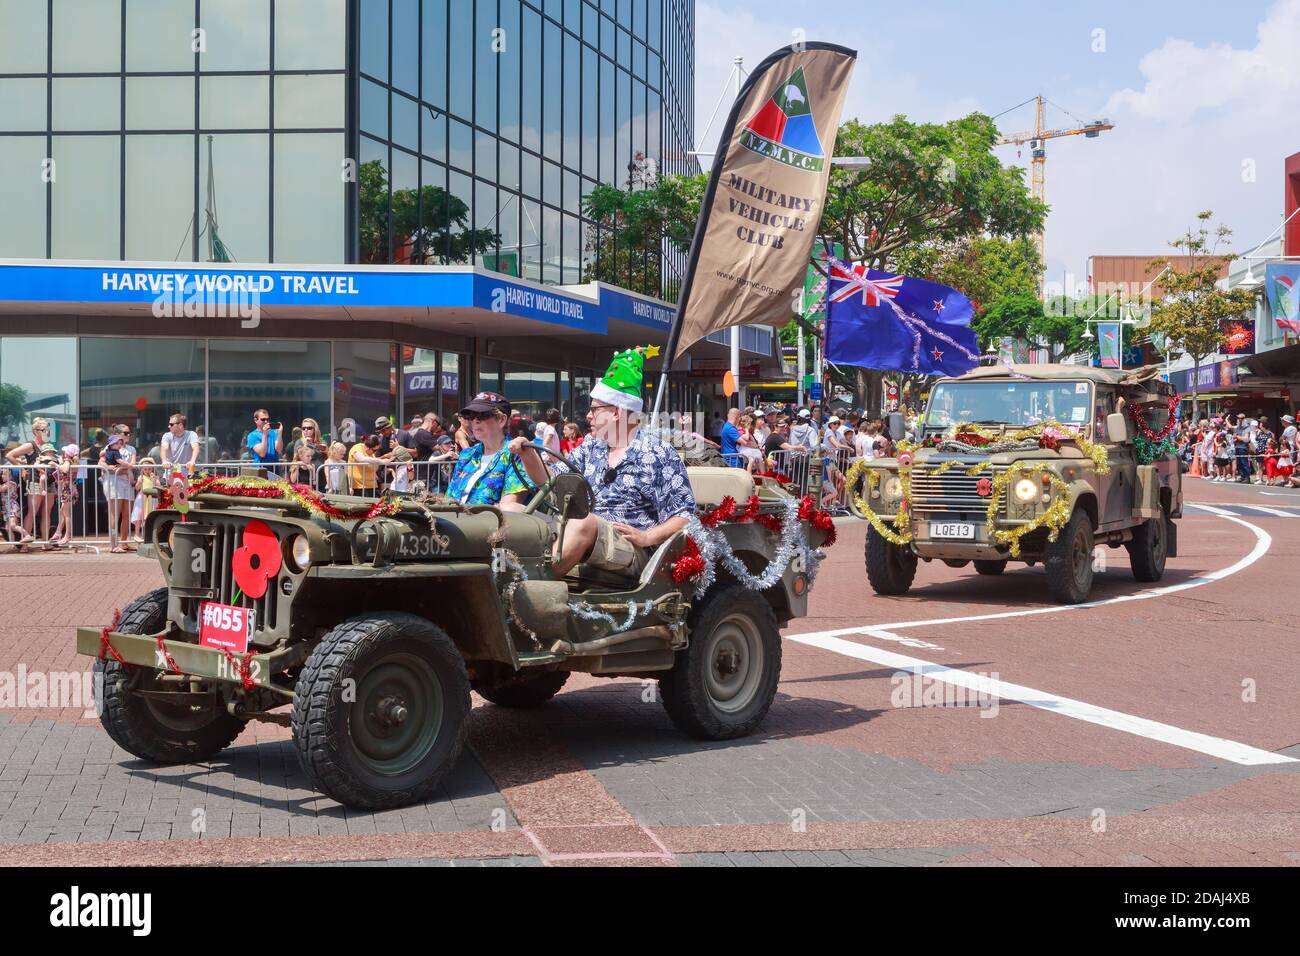 Decorated military vehicles, a jeep and a Land Rover, taking part in a Christmas parade in Tauranga, New Zealand Stock Photo